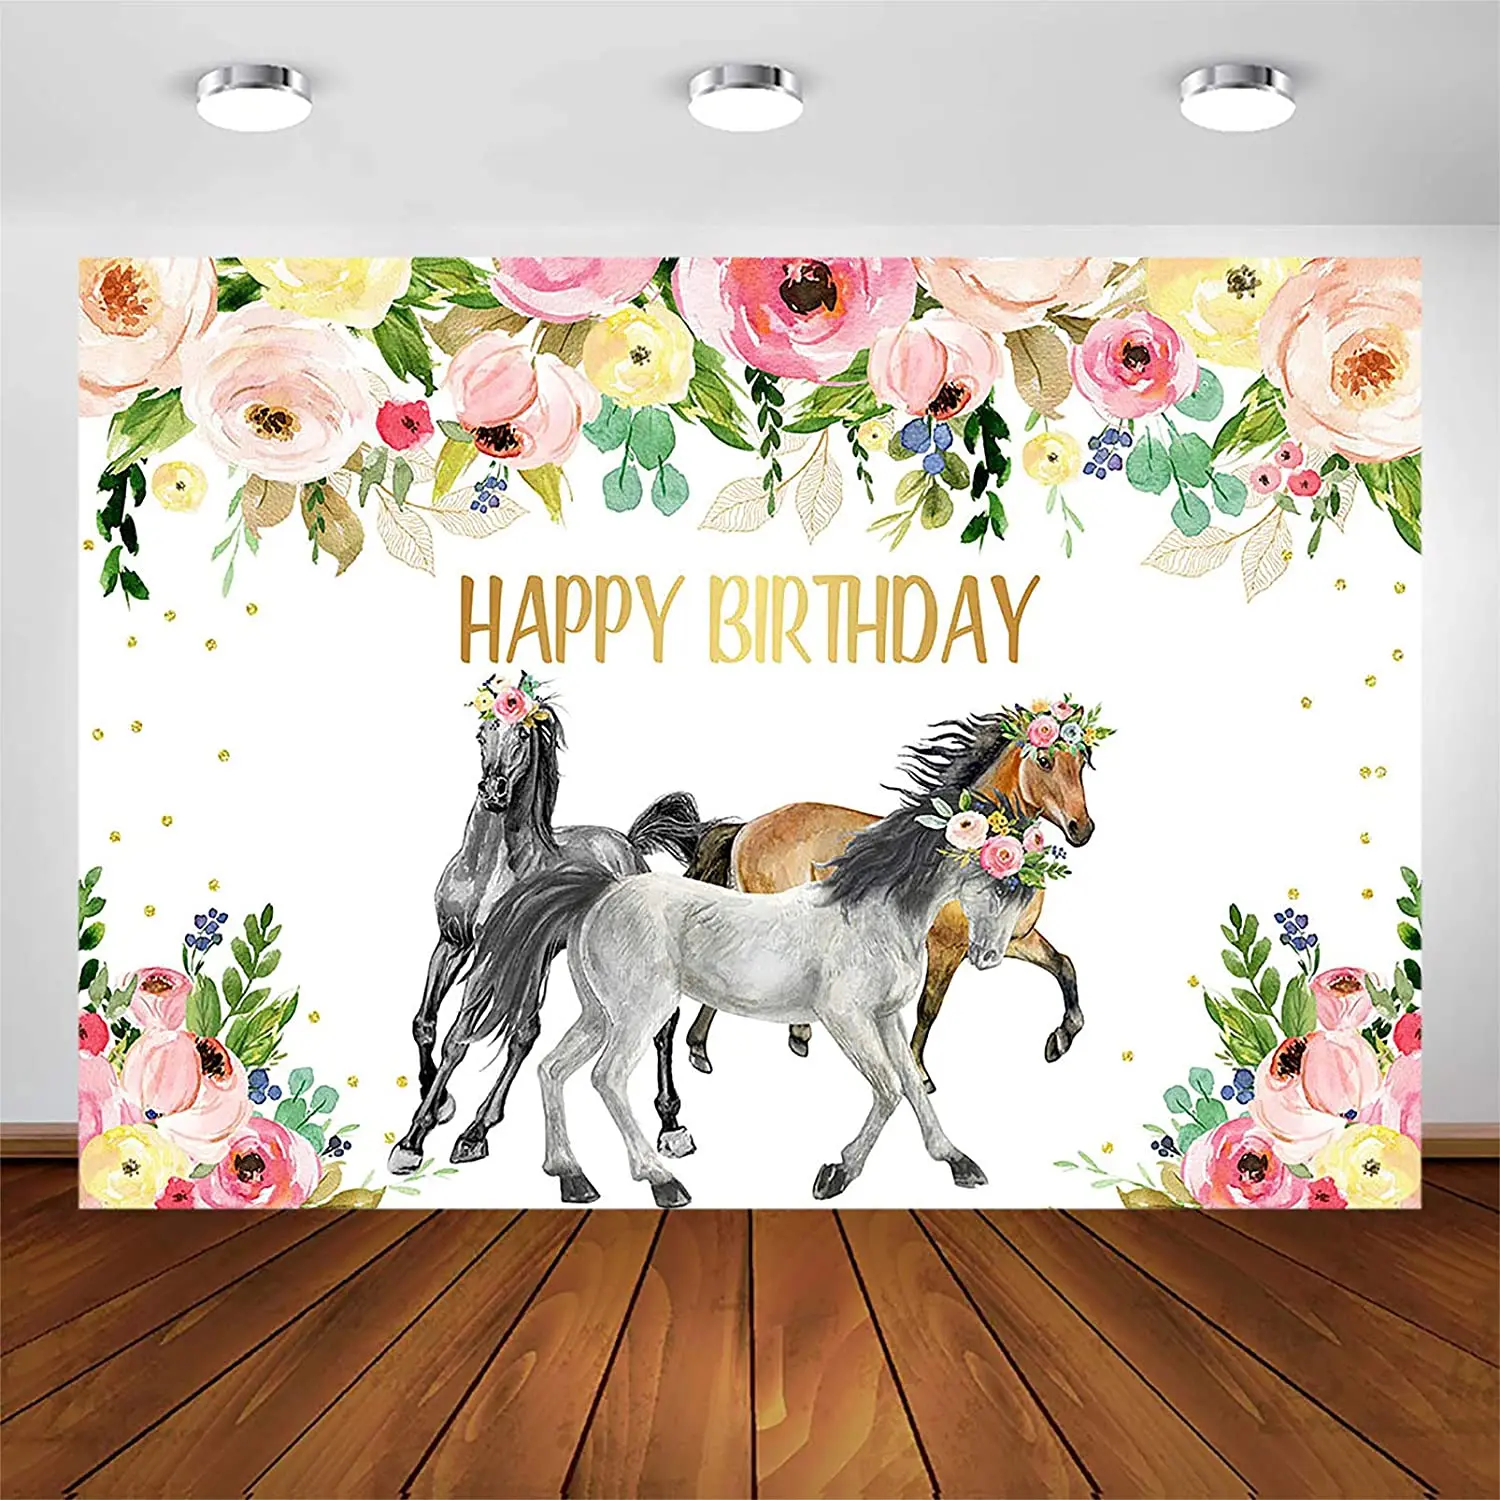 Enlarge Horse Birthday Party Backdrop for Girls 7x5ft Cowgirl Western Horse Party Photography Background Decorations Banner Photo Booth